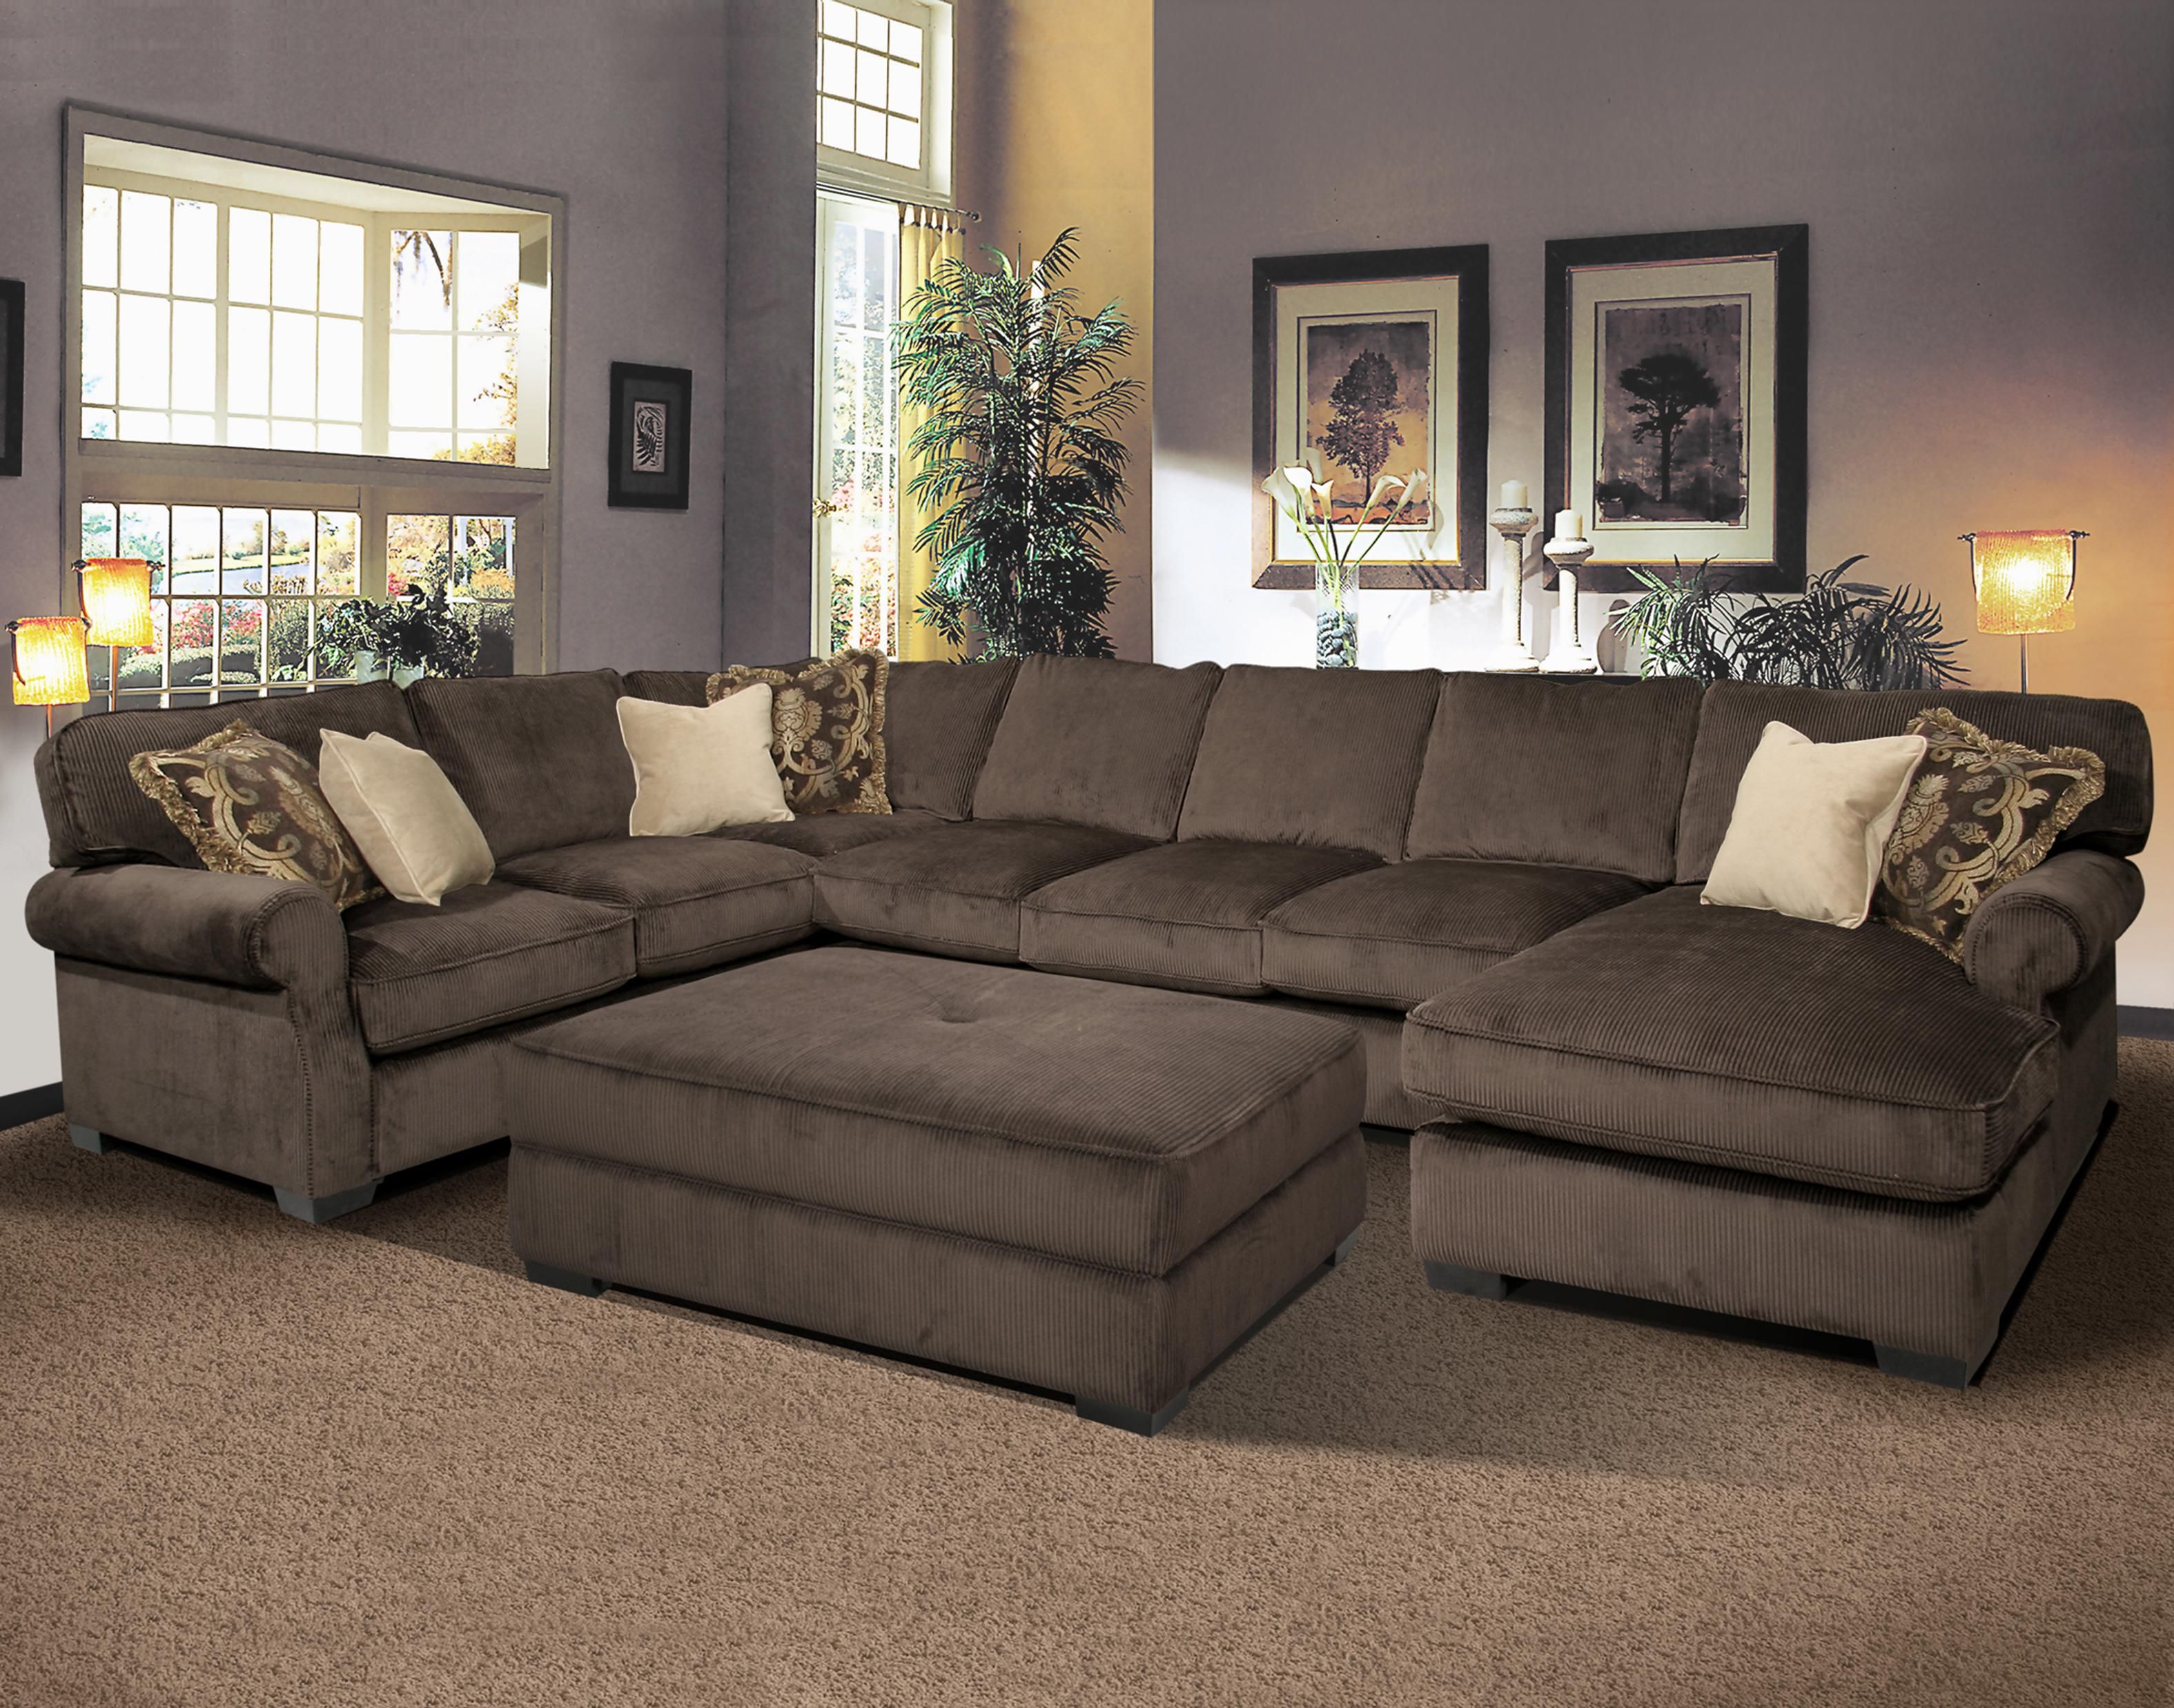 Comfy Sectional Couch : Pictures, Ideas